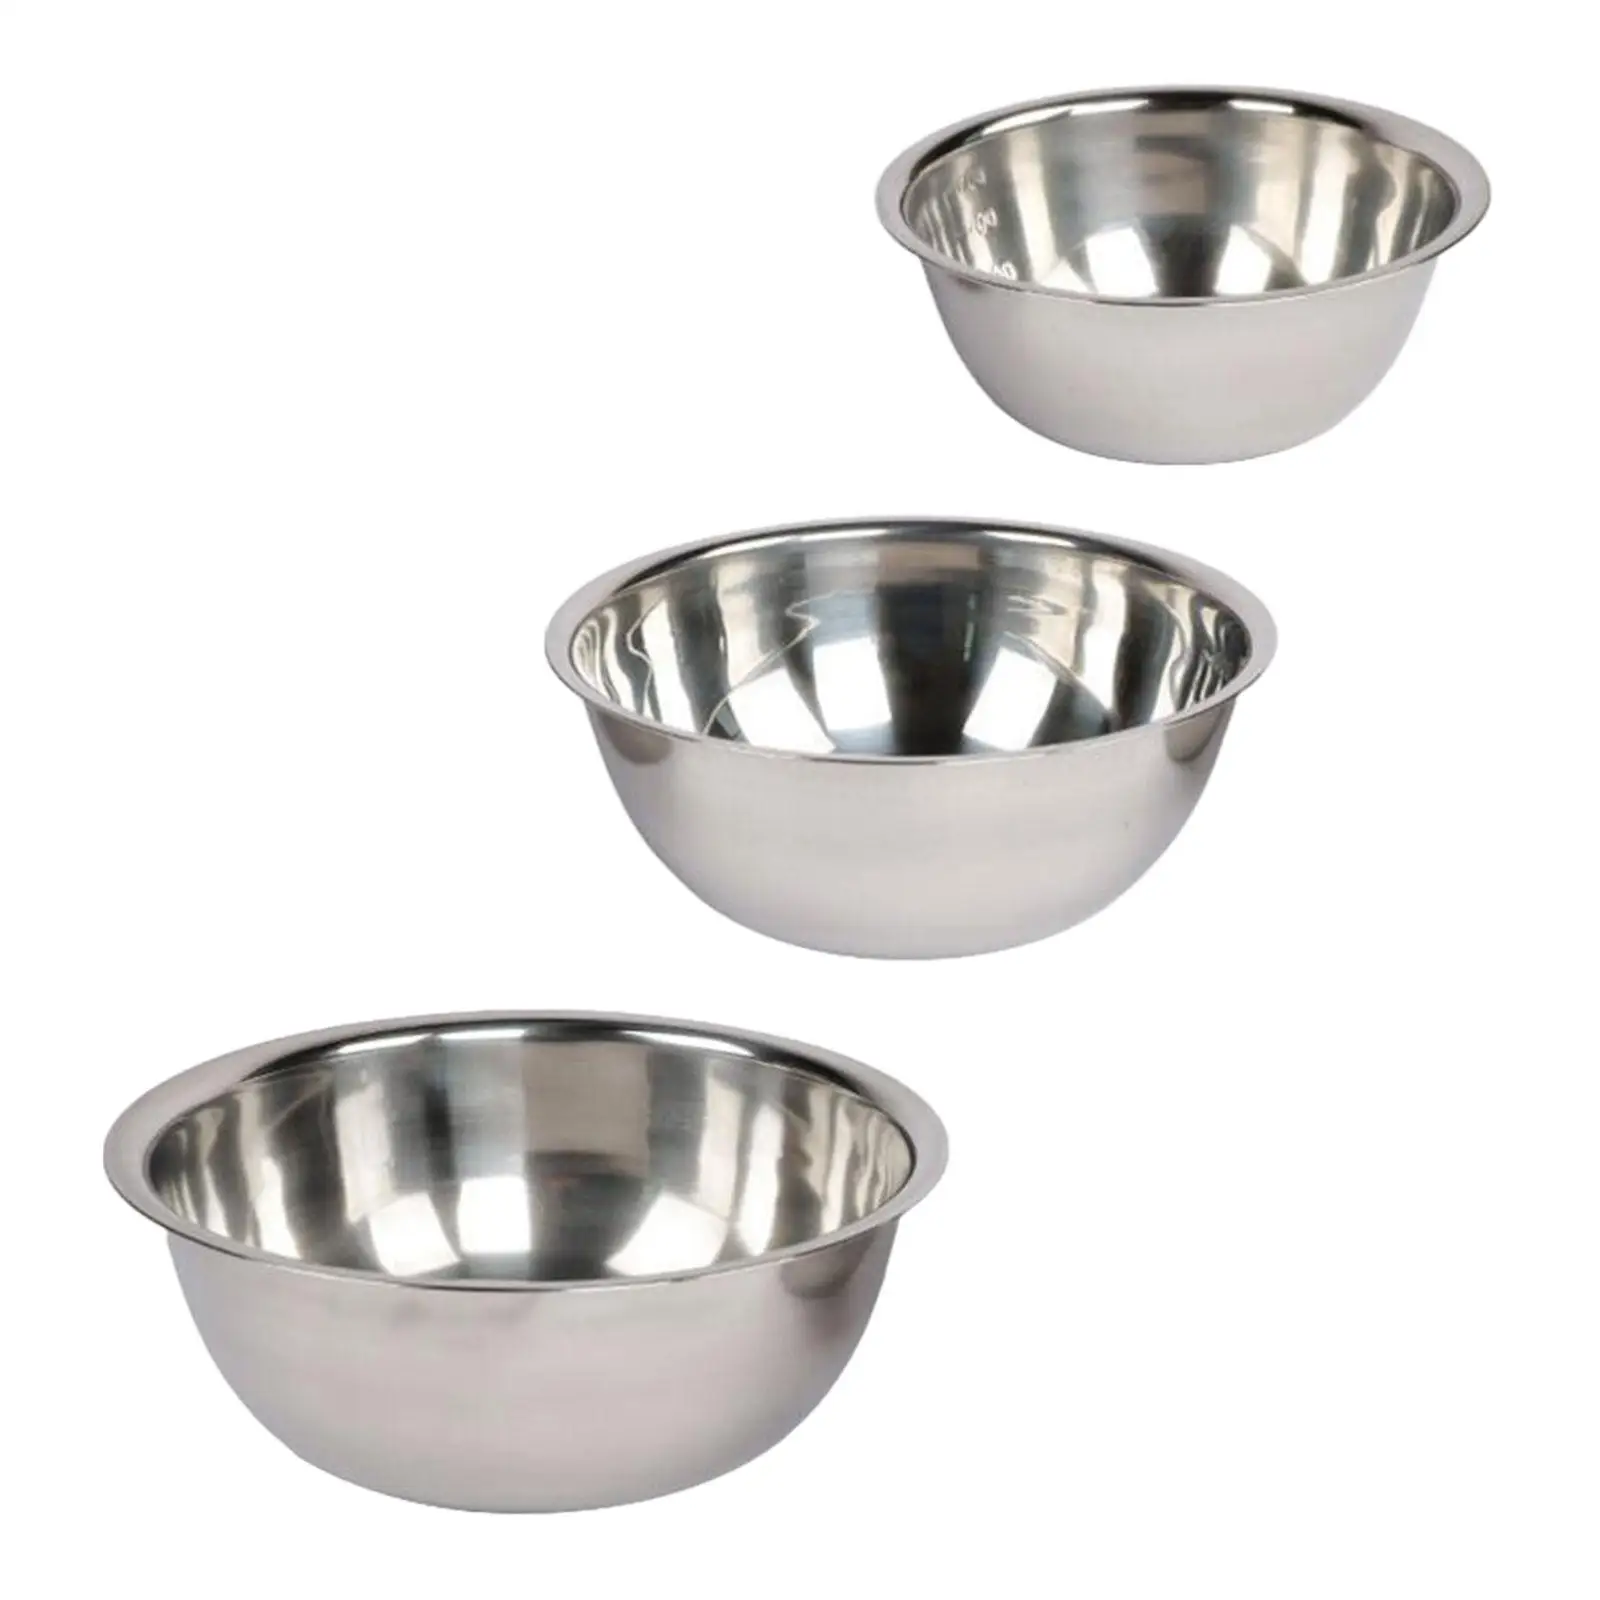 3Pcs Stainless Steel Bowls Set Outdoor Tableware Cookware Camping Mess Set Camping Utensils for Party Picnic Hiking Barbecue